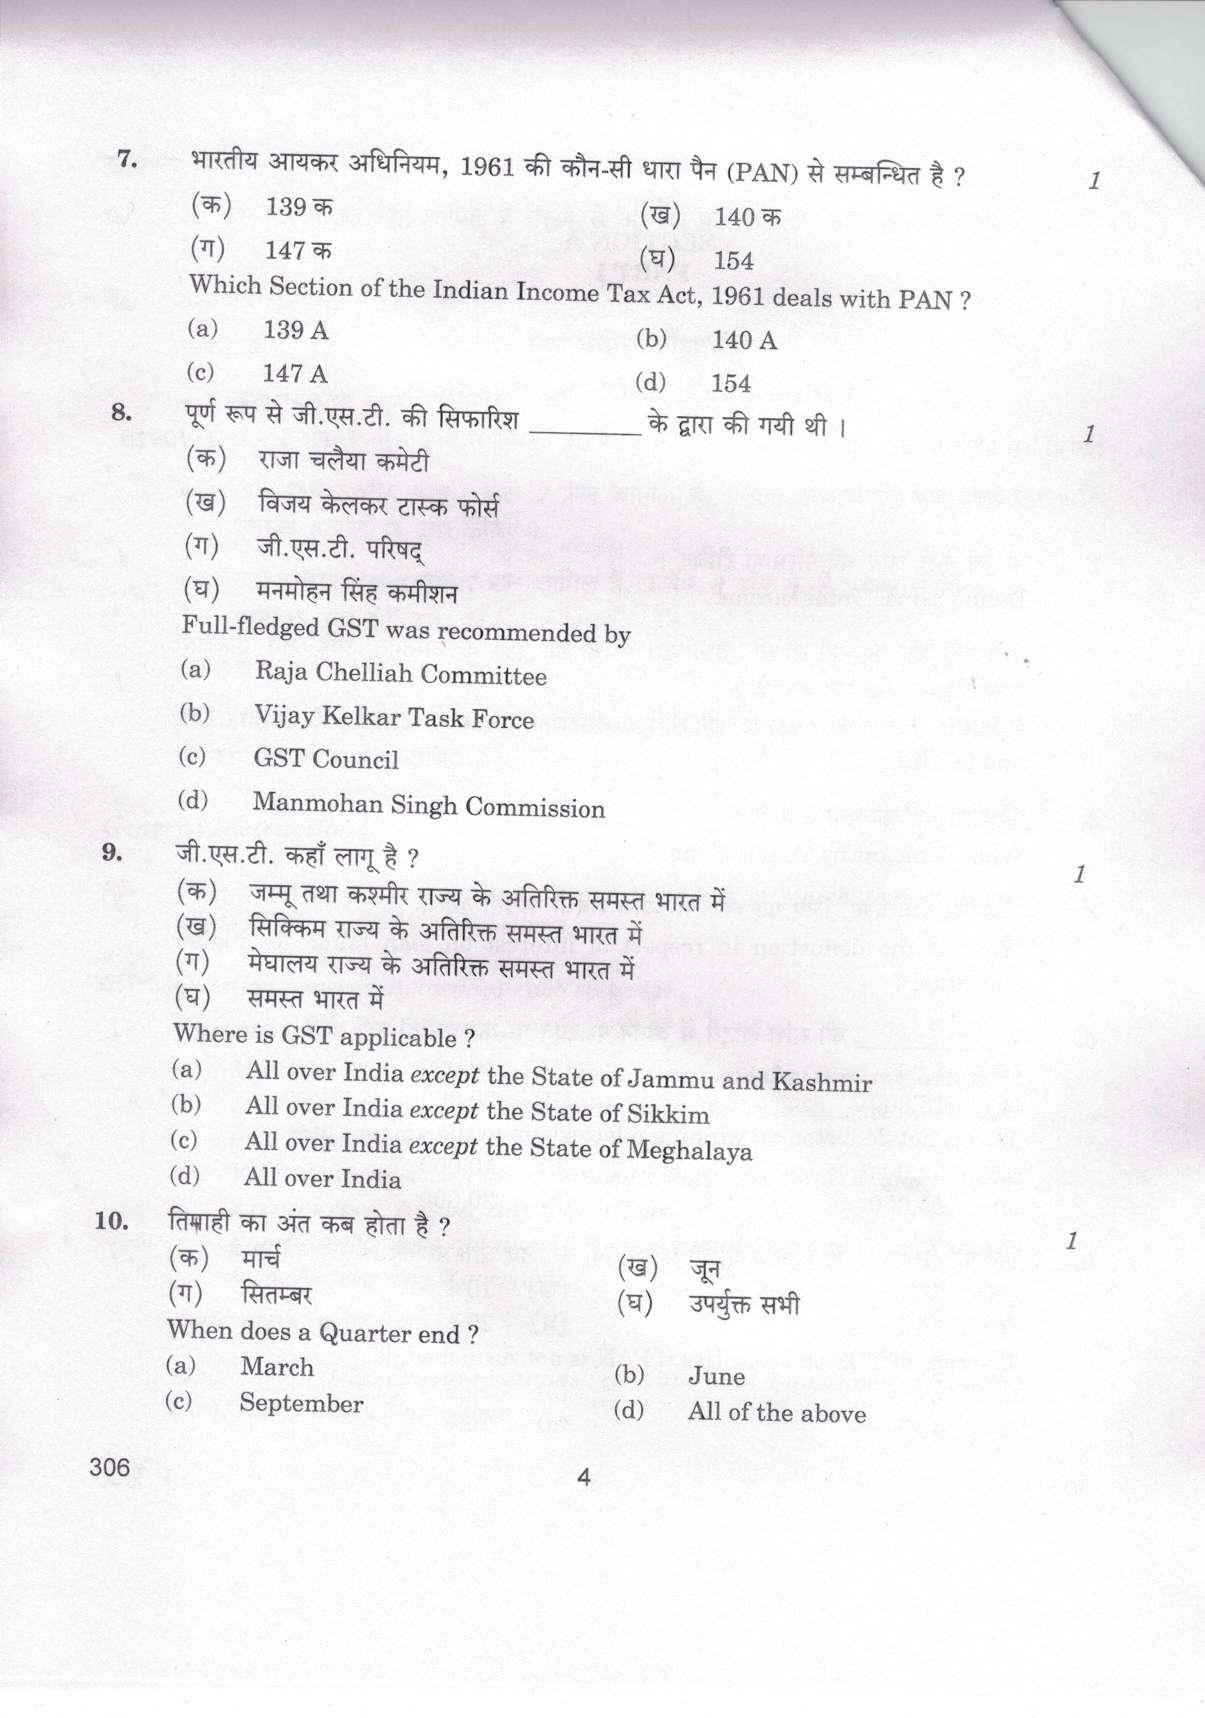 CBSE Class 12 306 Taxation_compressed 2019 Question Paper - Page 4